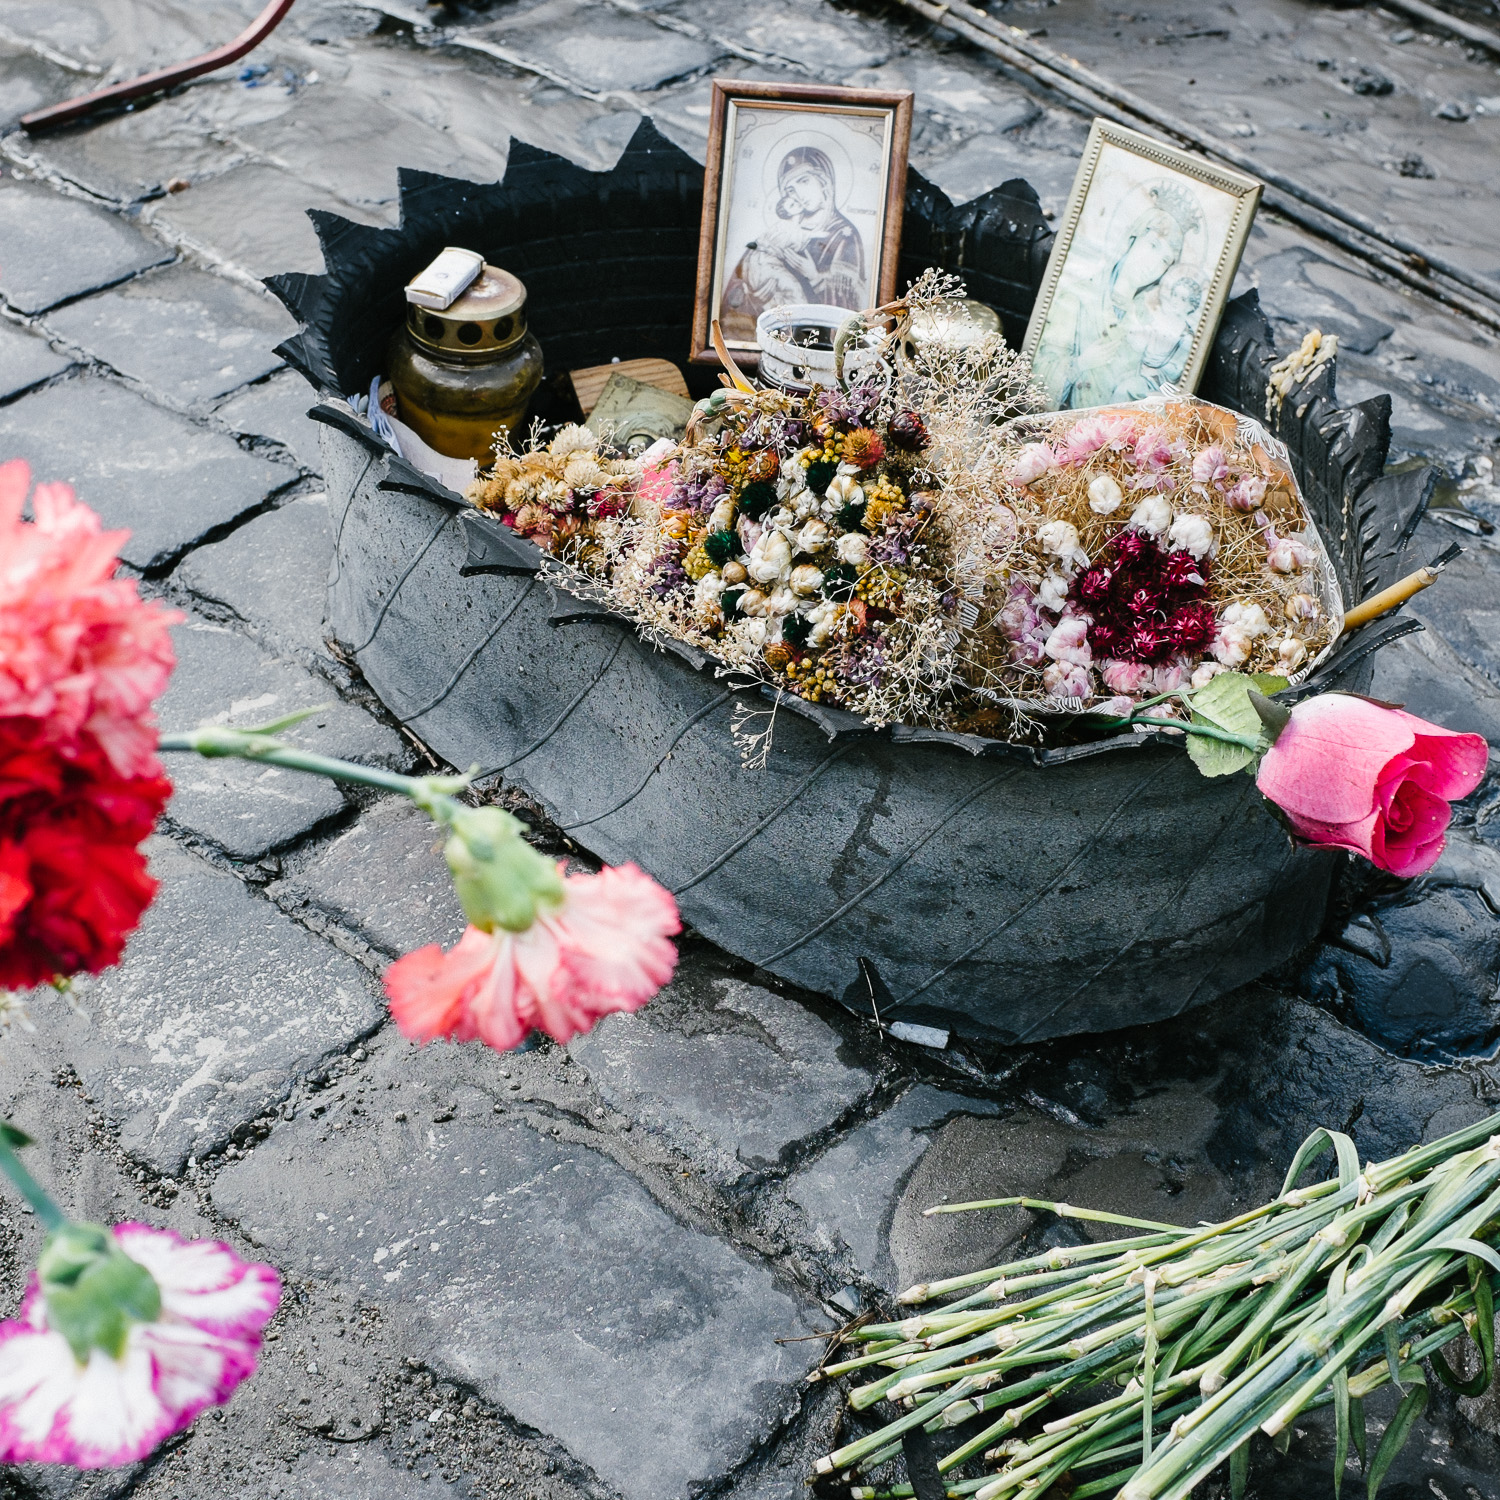  A memorial made from a tire on Kyiv's Hrushevskoho Street, off Independence Square. 